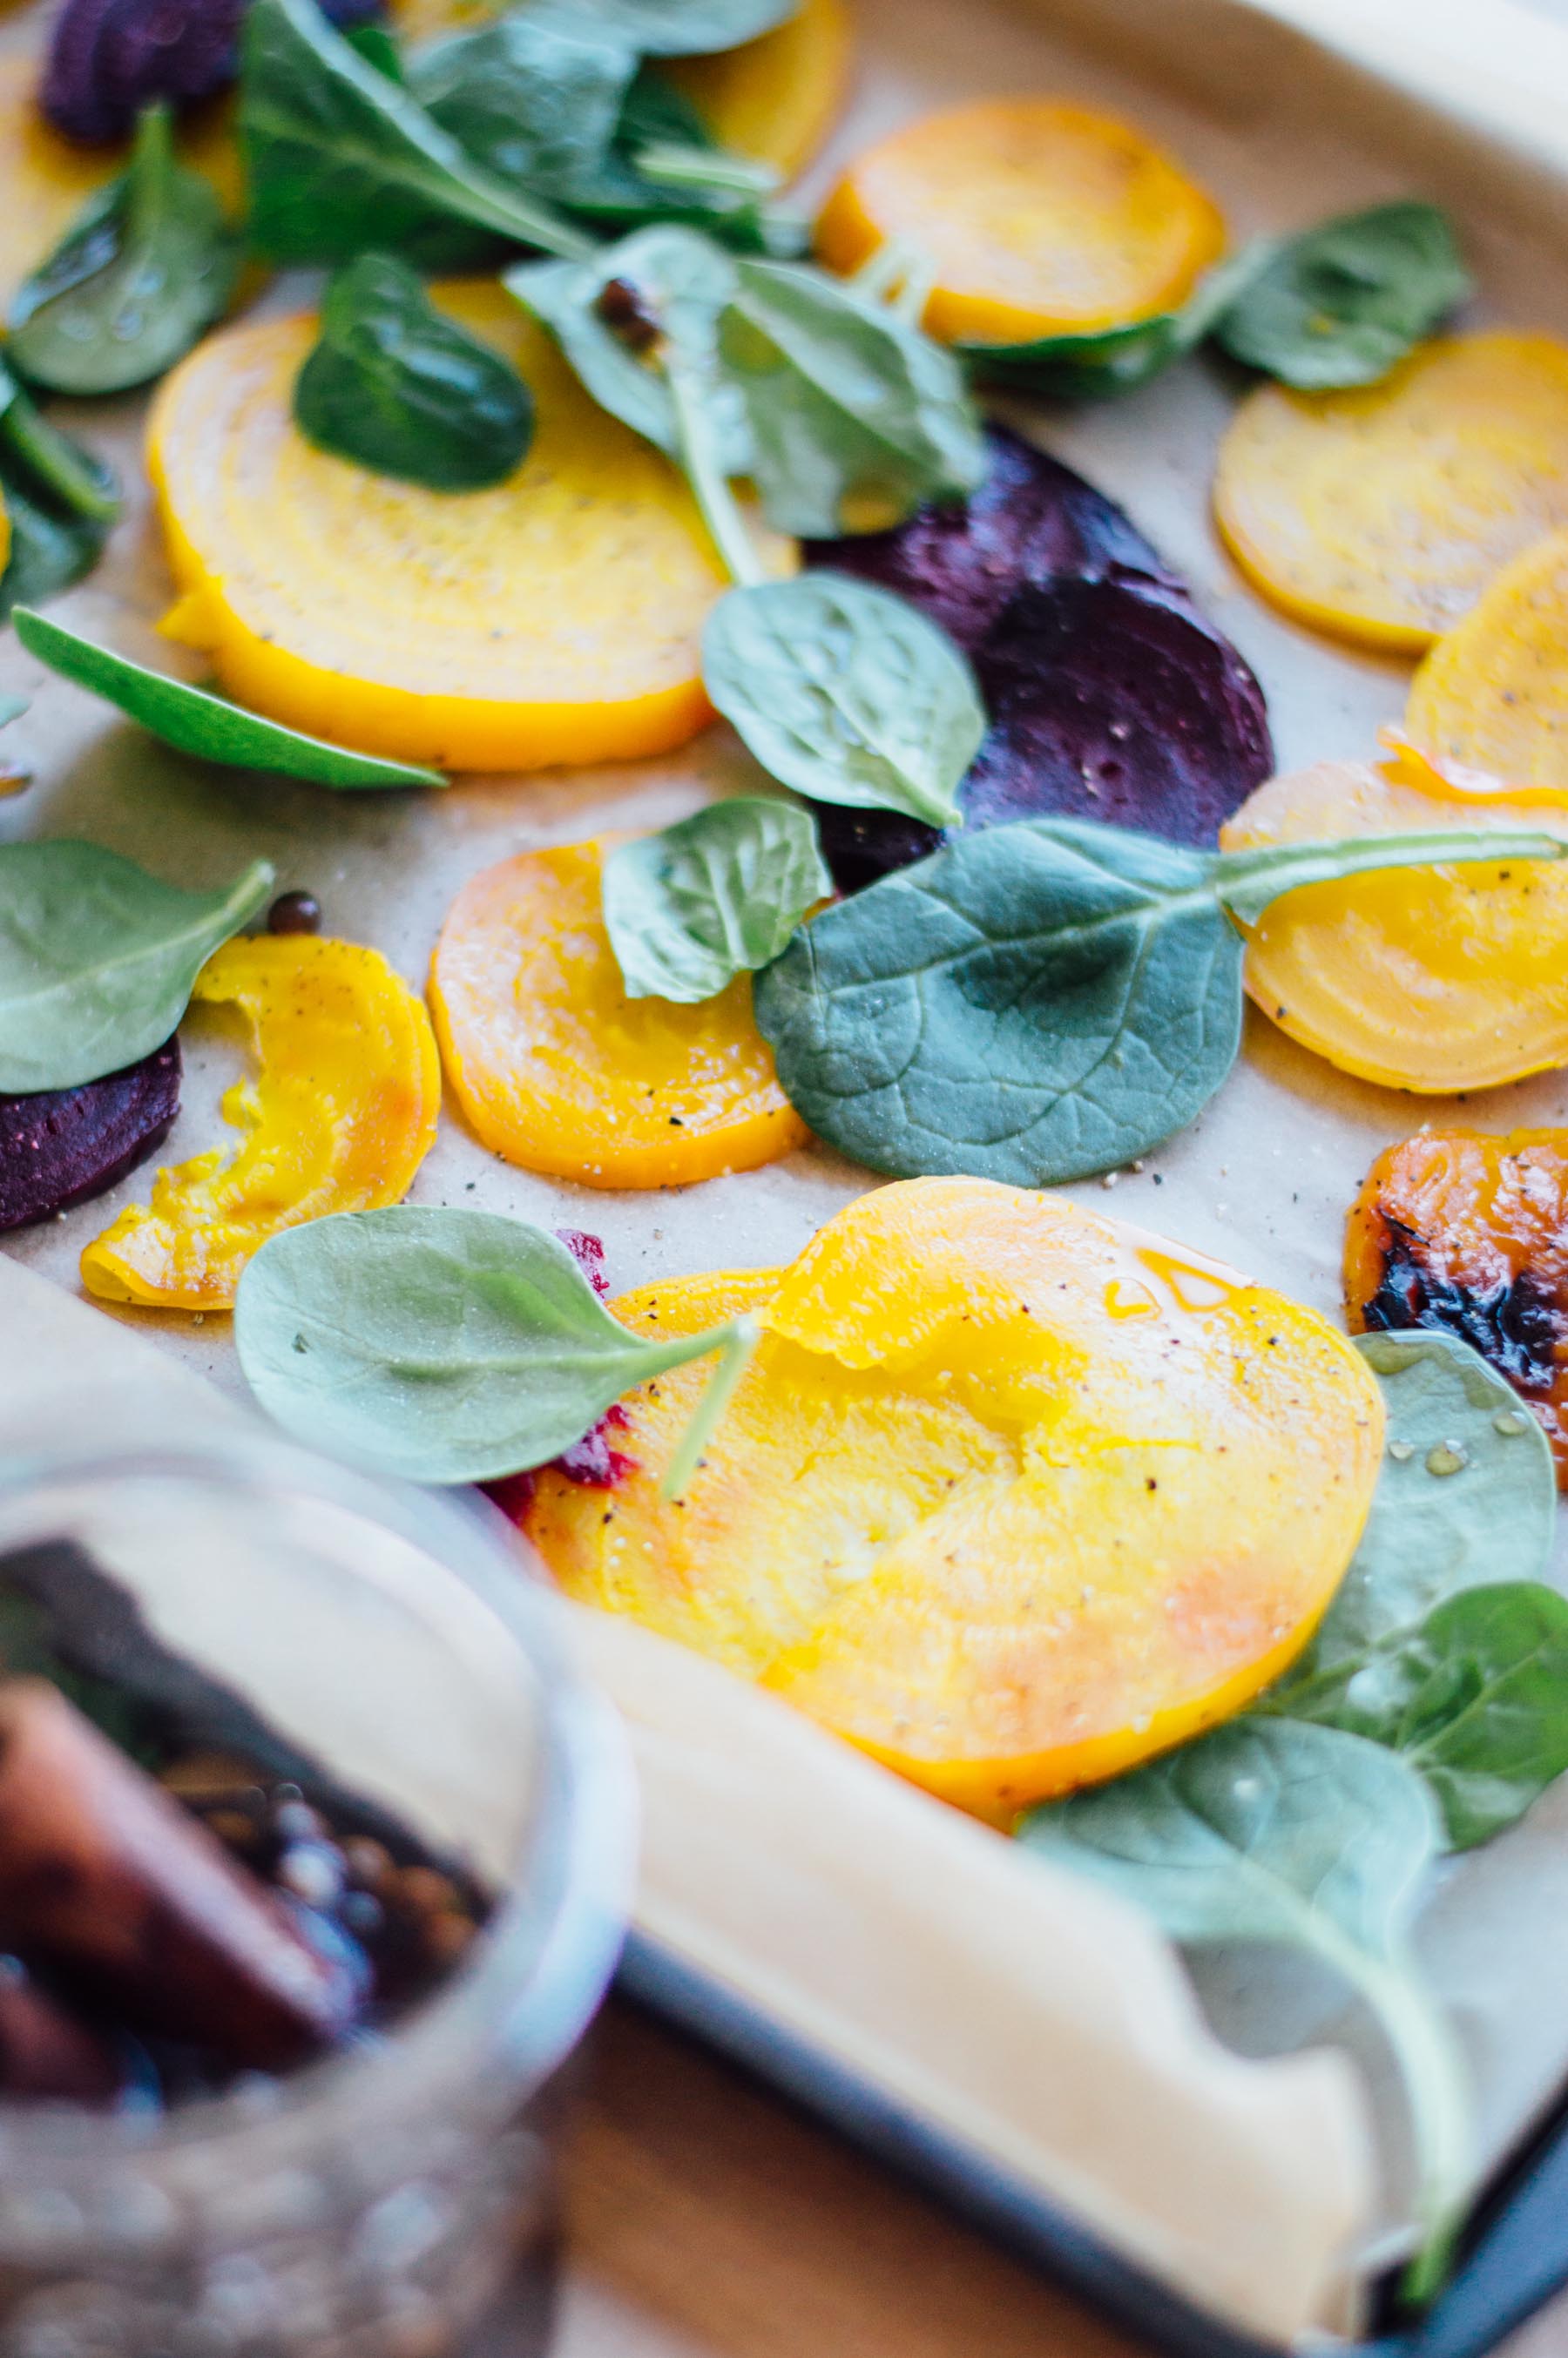 Roasted Golden Beets recipe in collaboration with the Boston Public Market | bygabriella.co